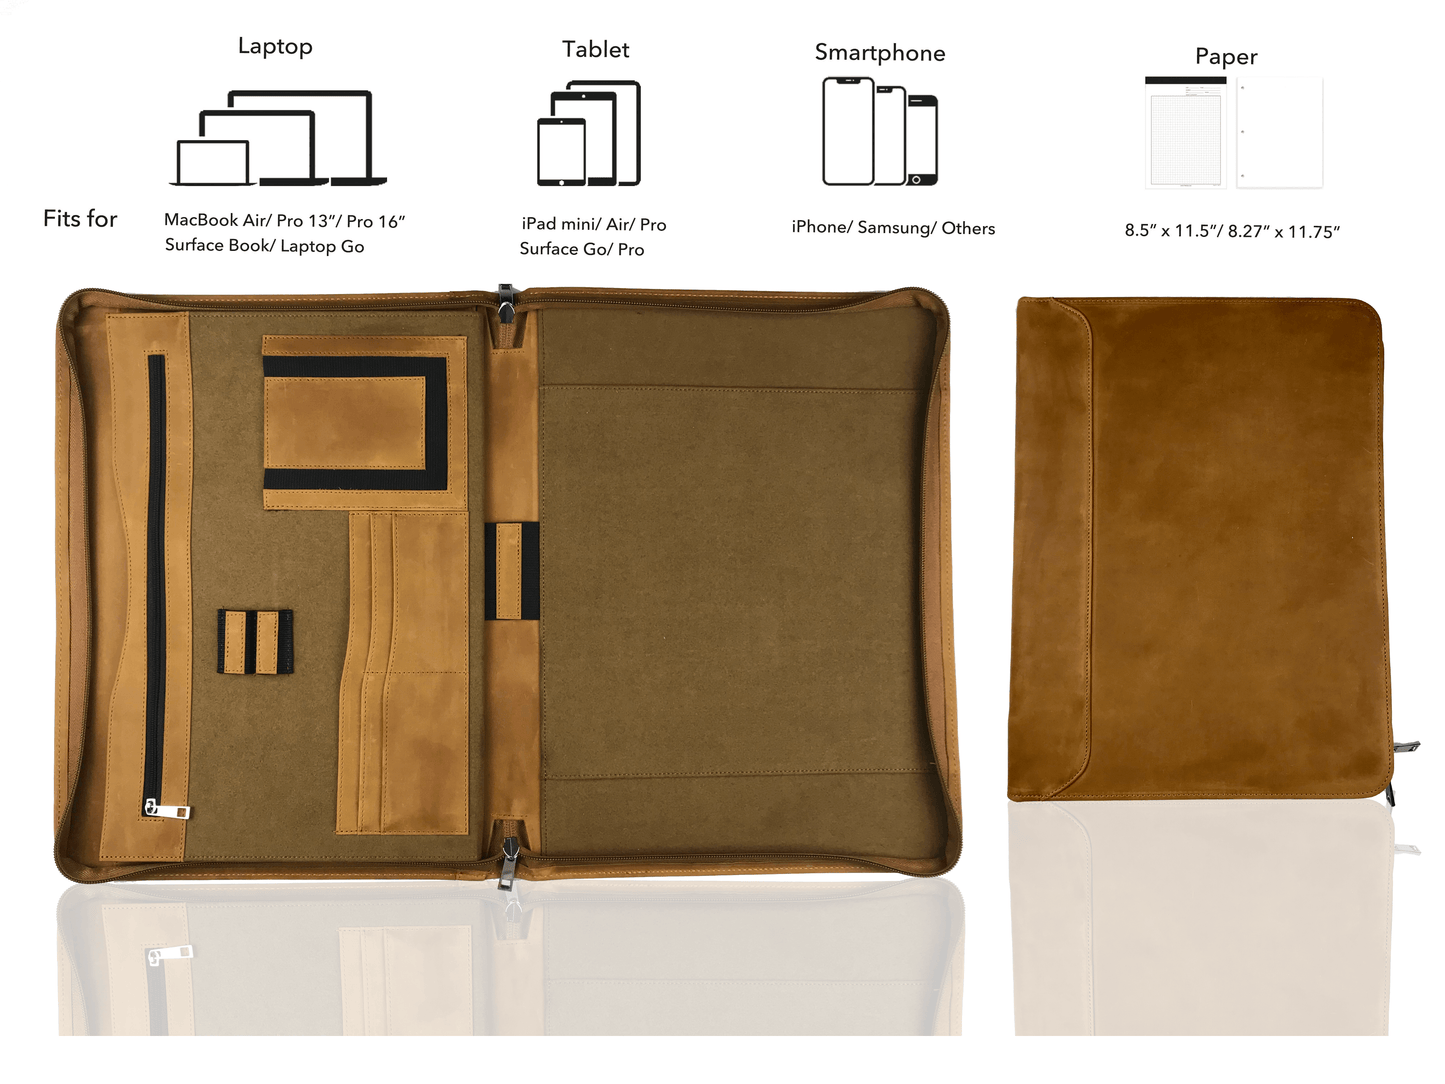 Genuine Leather Portfolio, Zipper Padfolio for Legal Paper 8.5" x 11"/ 8.5" x 14"/ A4 Letter Size Notepad/ MacBook 13", Gift (Tan)